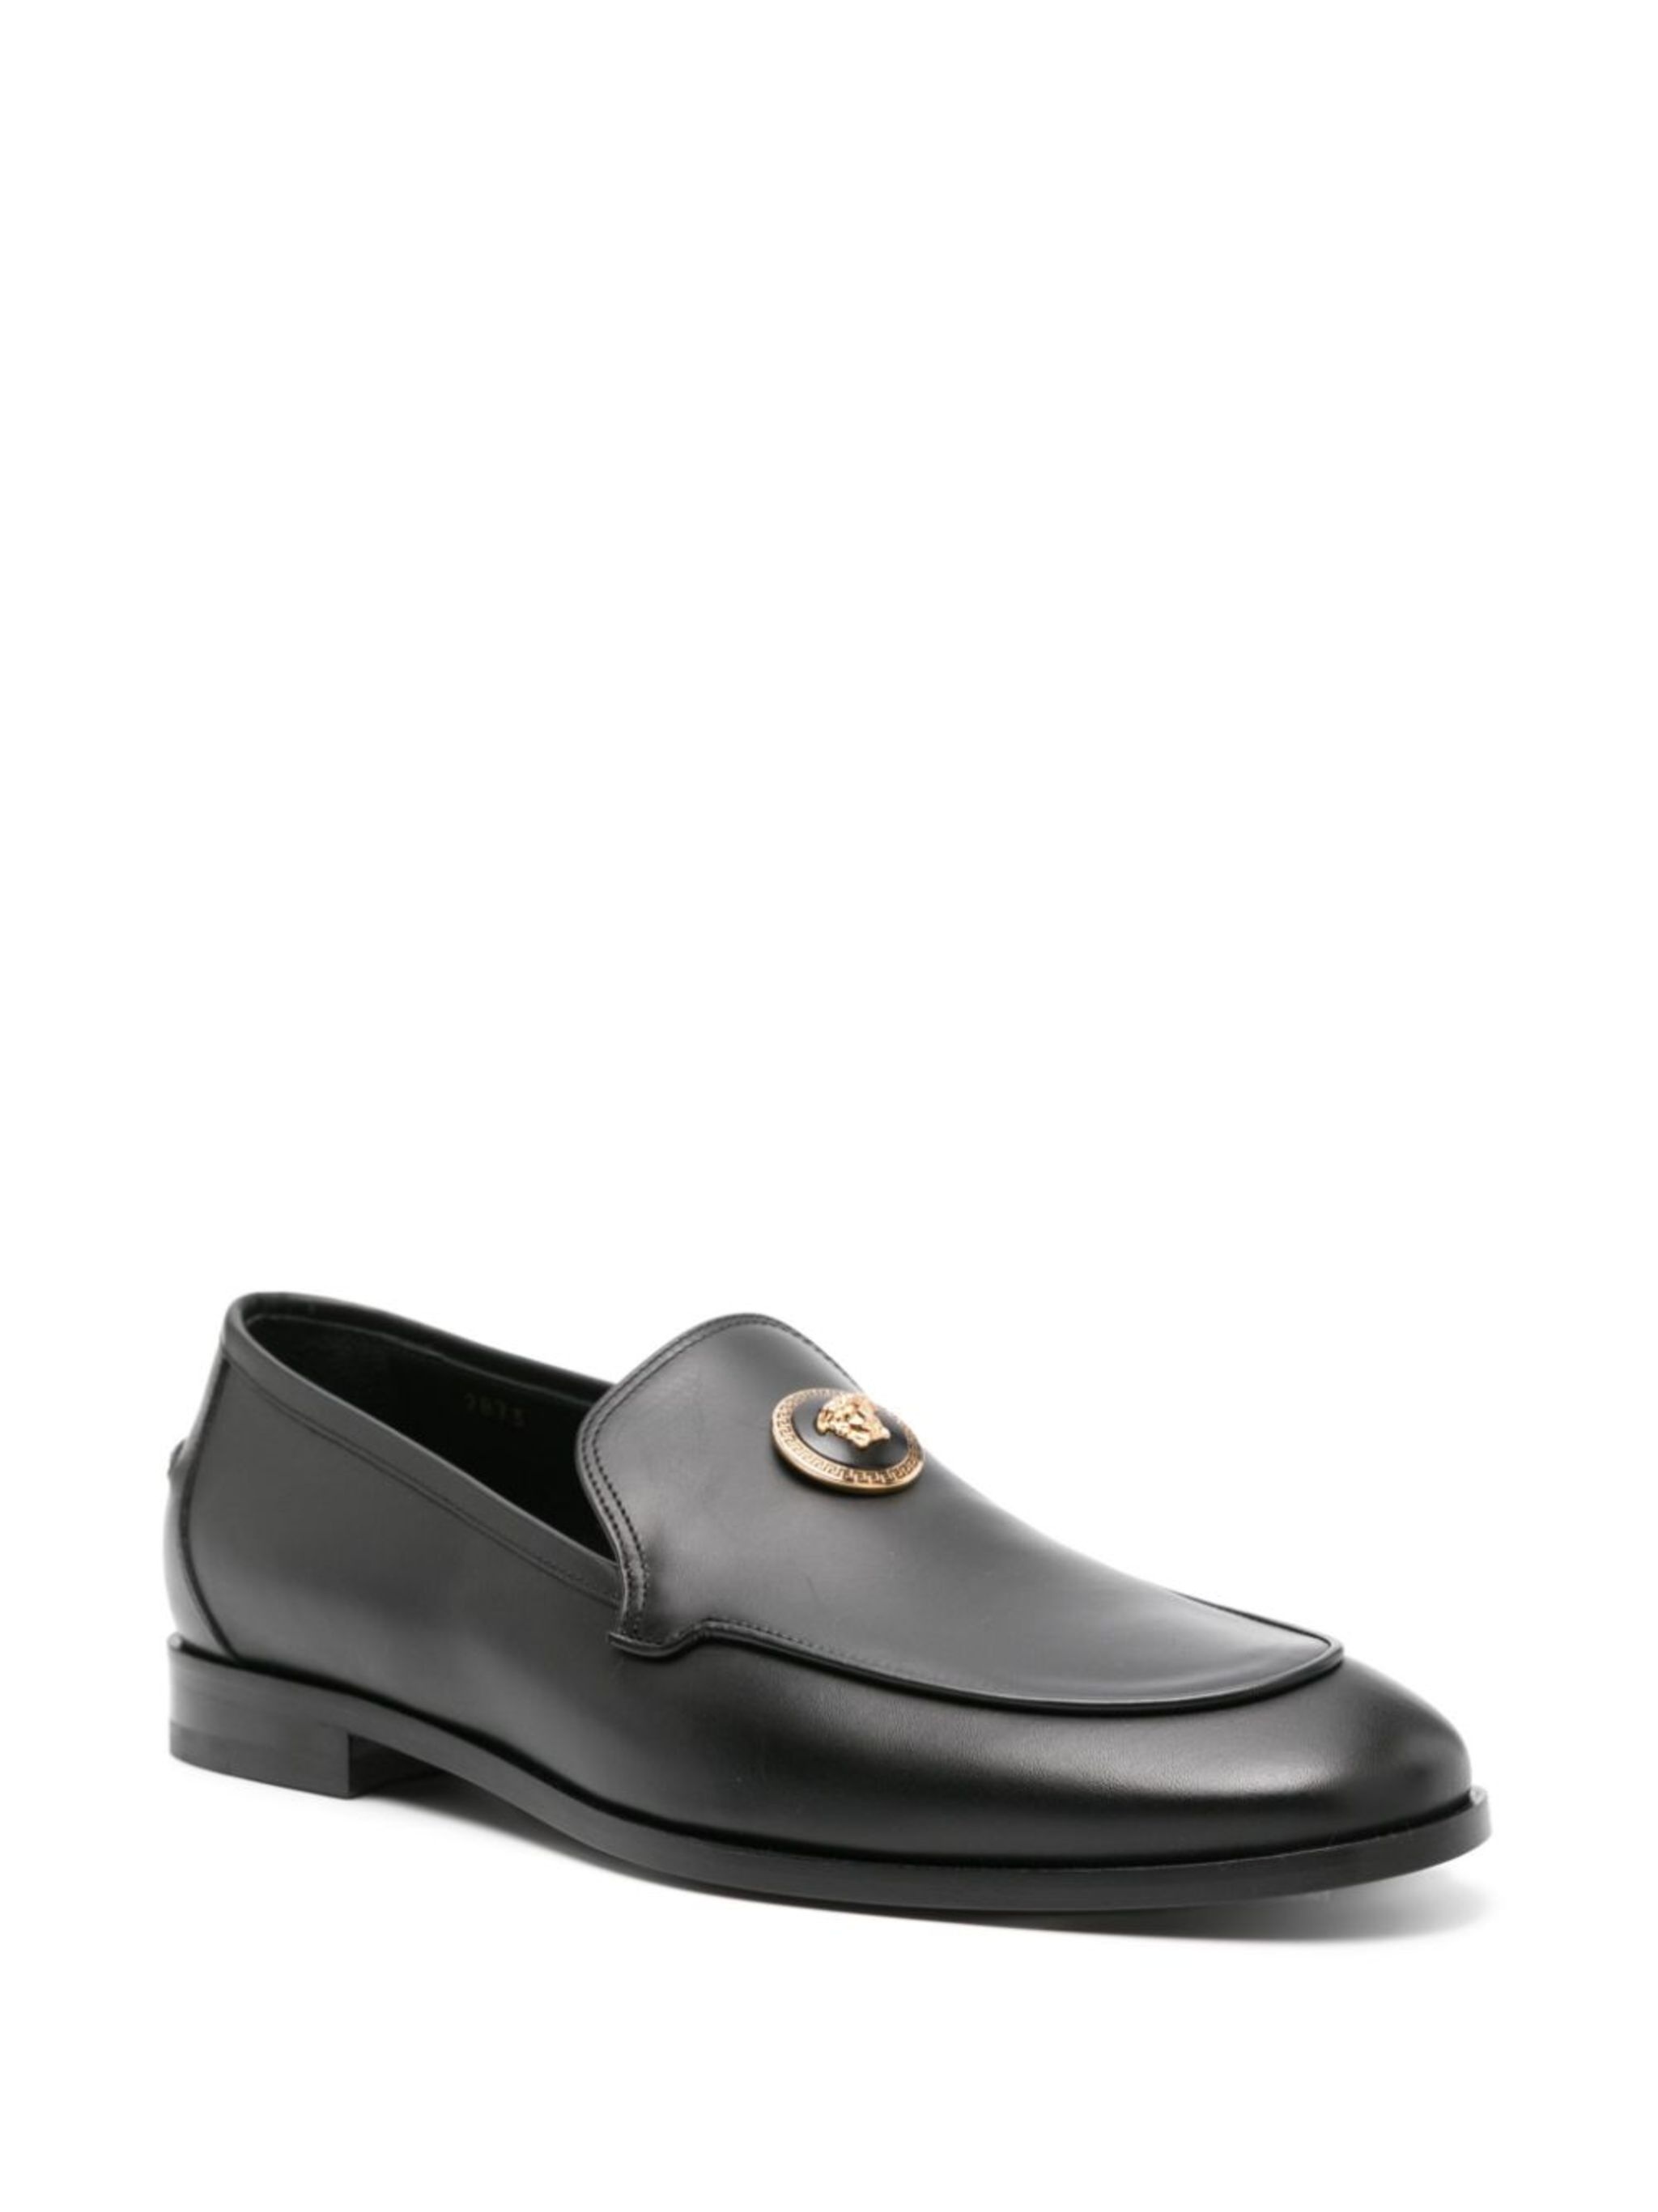 Medusa-plaque leather loafers - 2